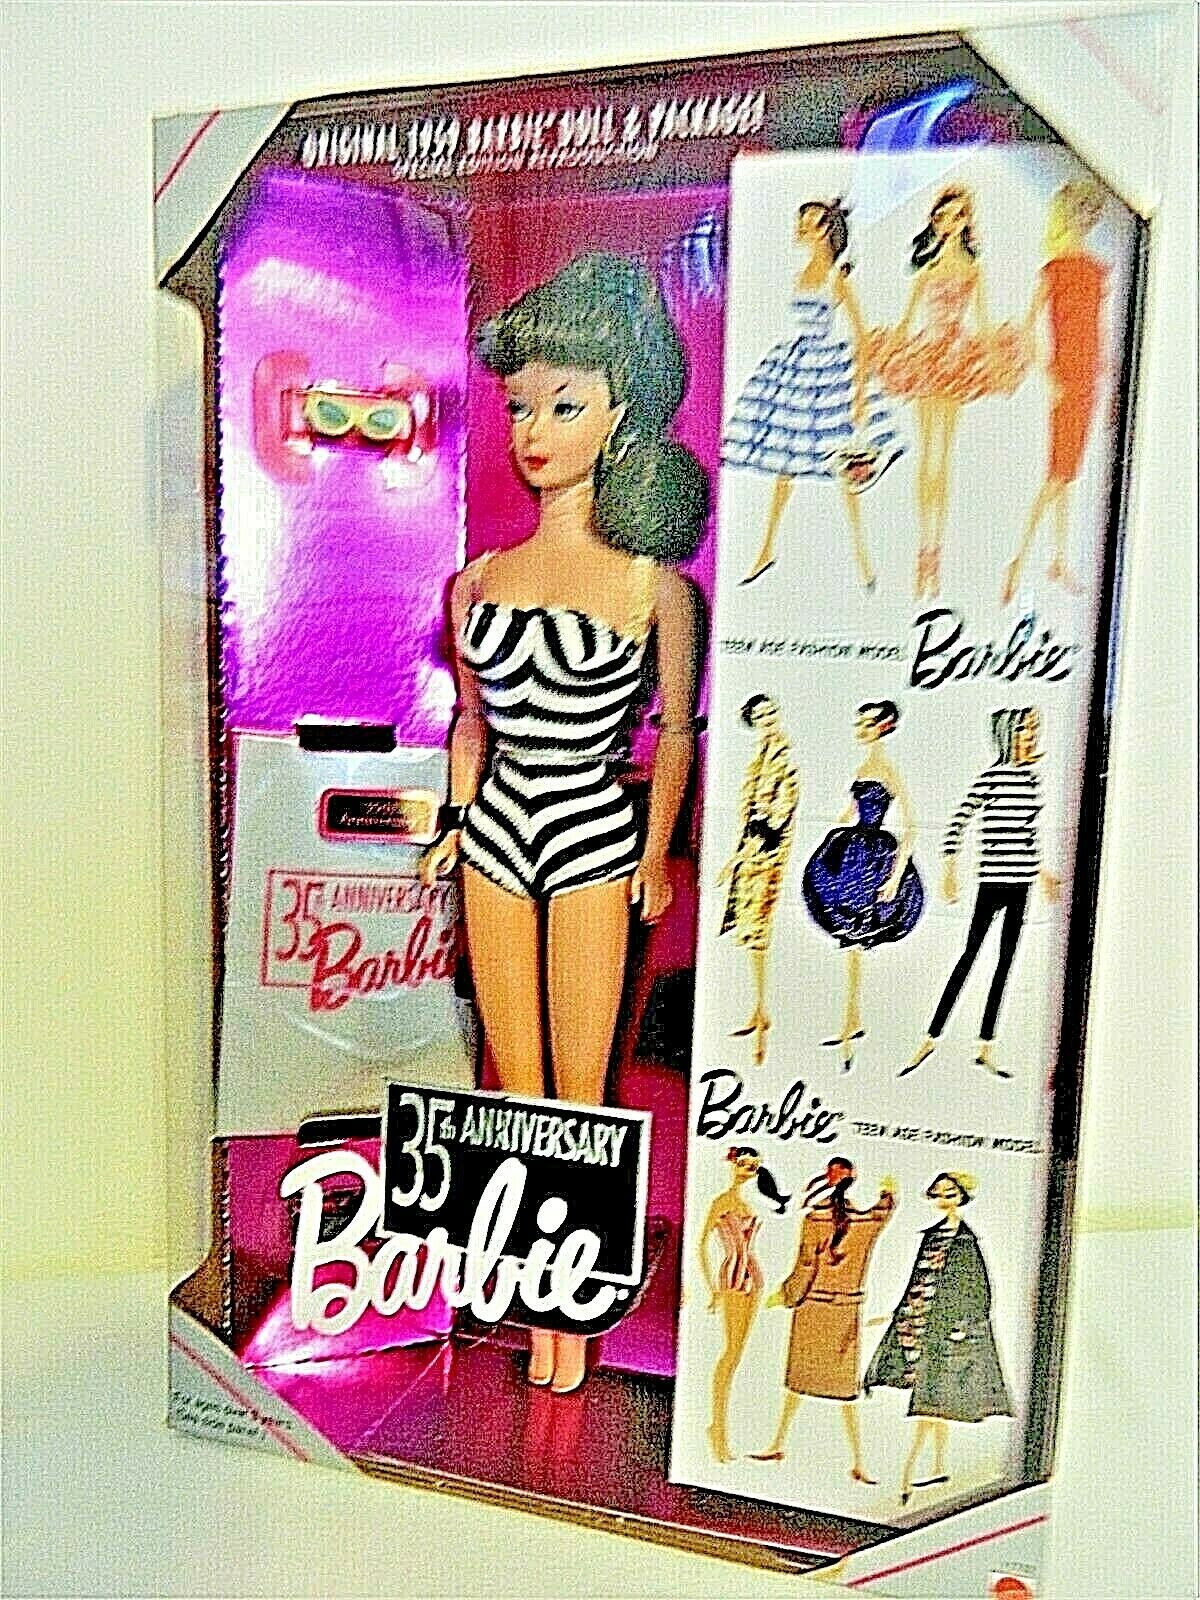 35th Anniversary Barbie Doll 1959 Barbie Doll And Package Reproduction Se 1993